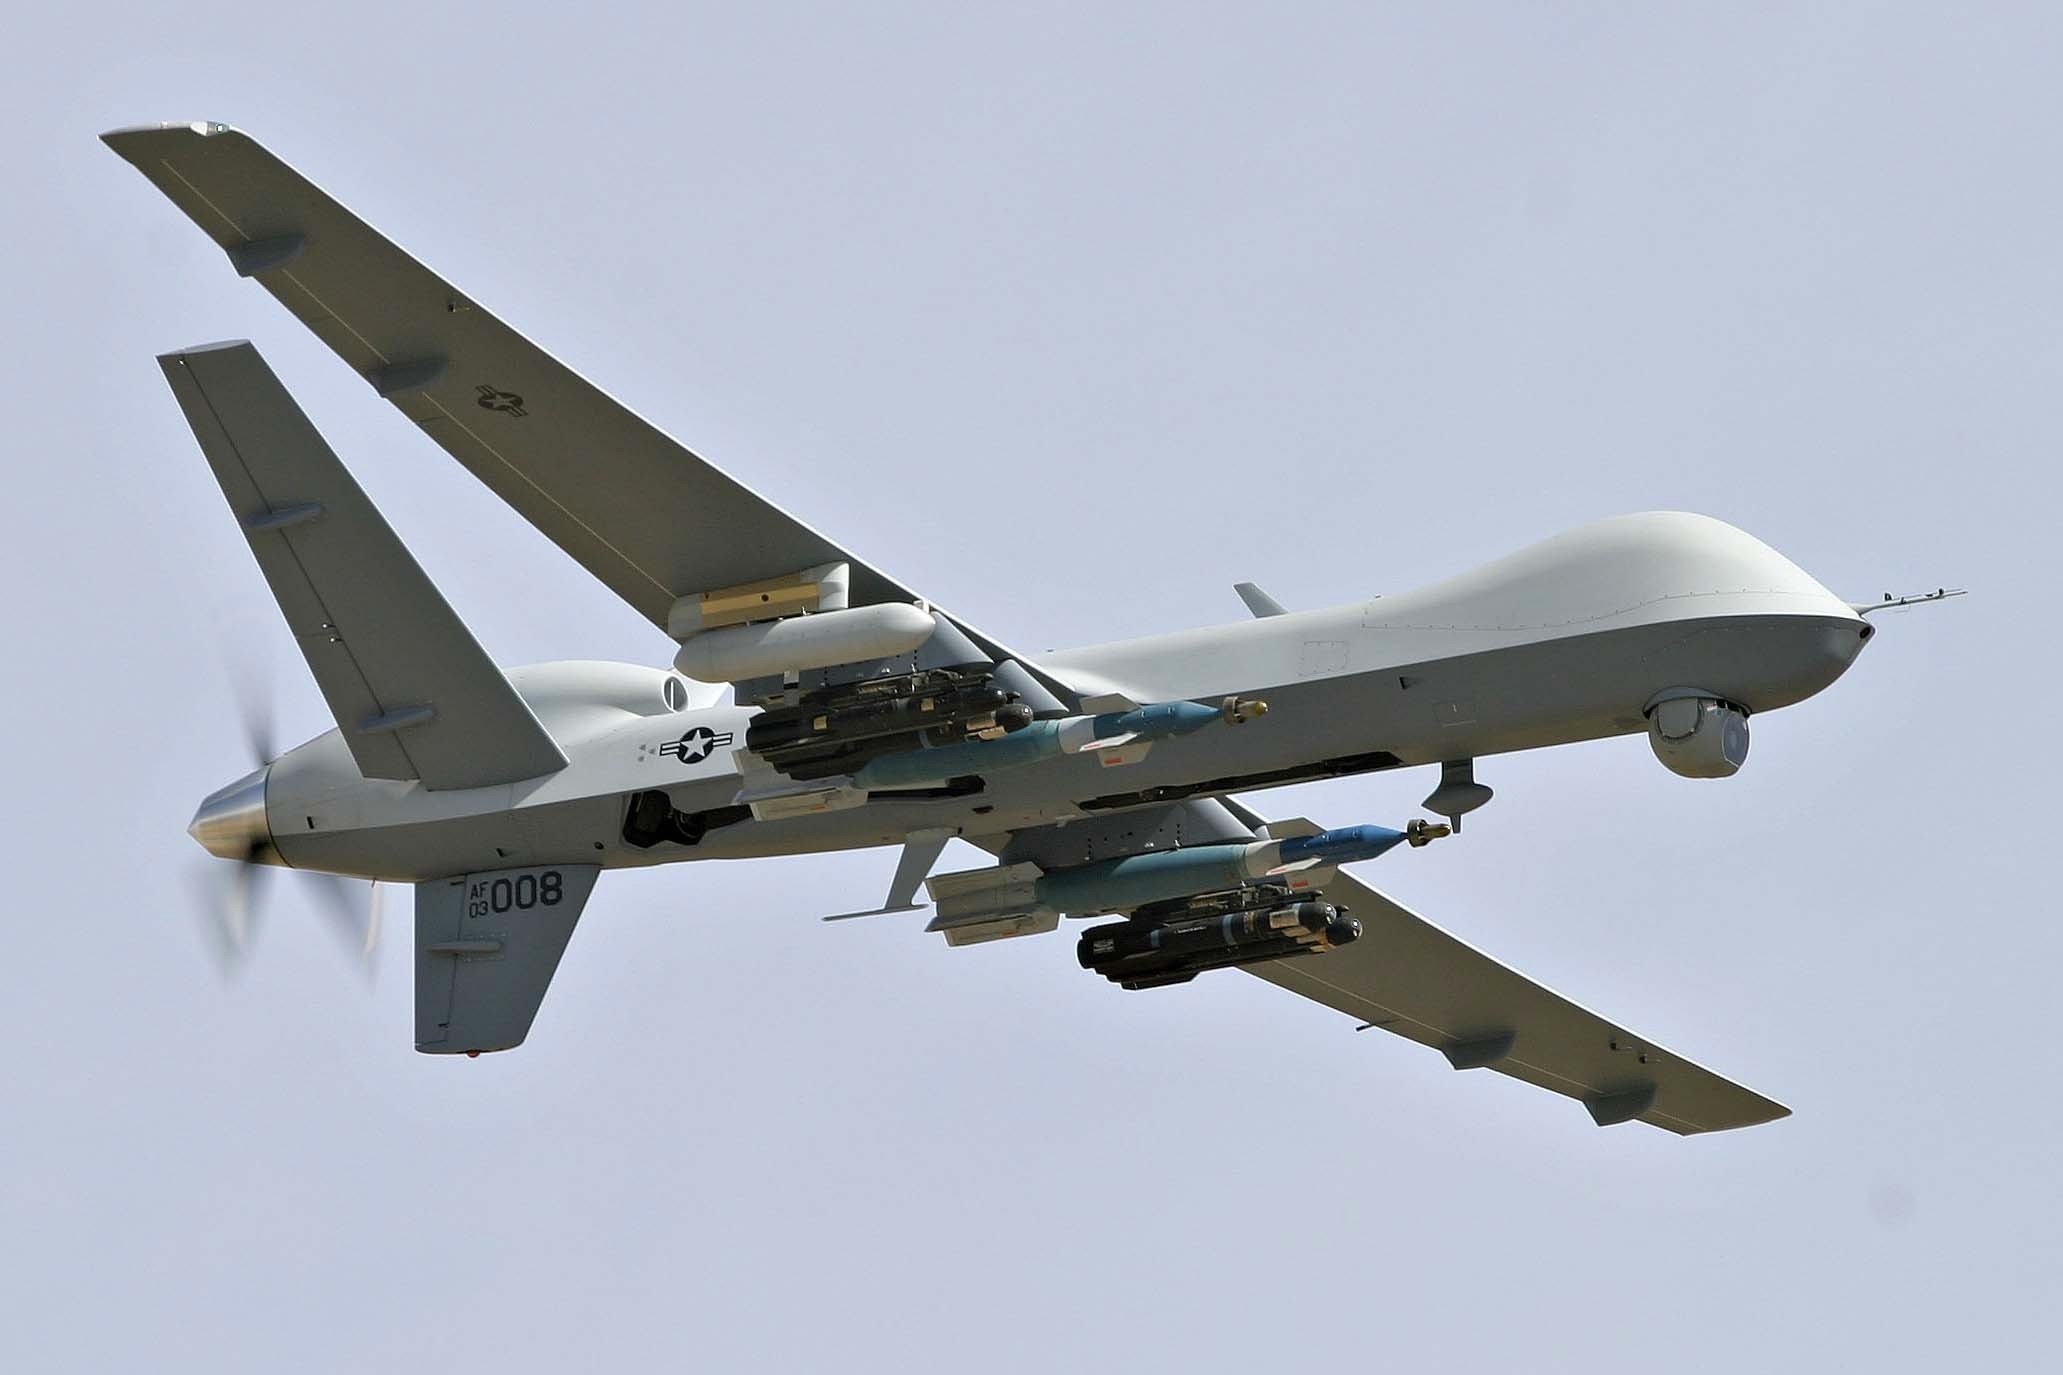 Reaper Drones: The New Close Air Support Weapon